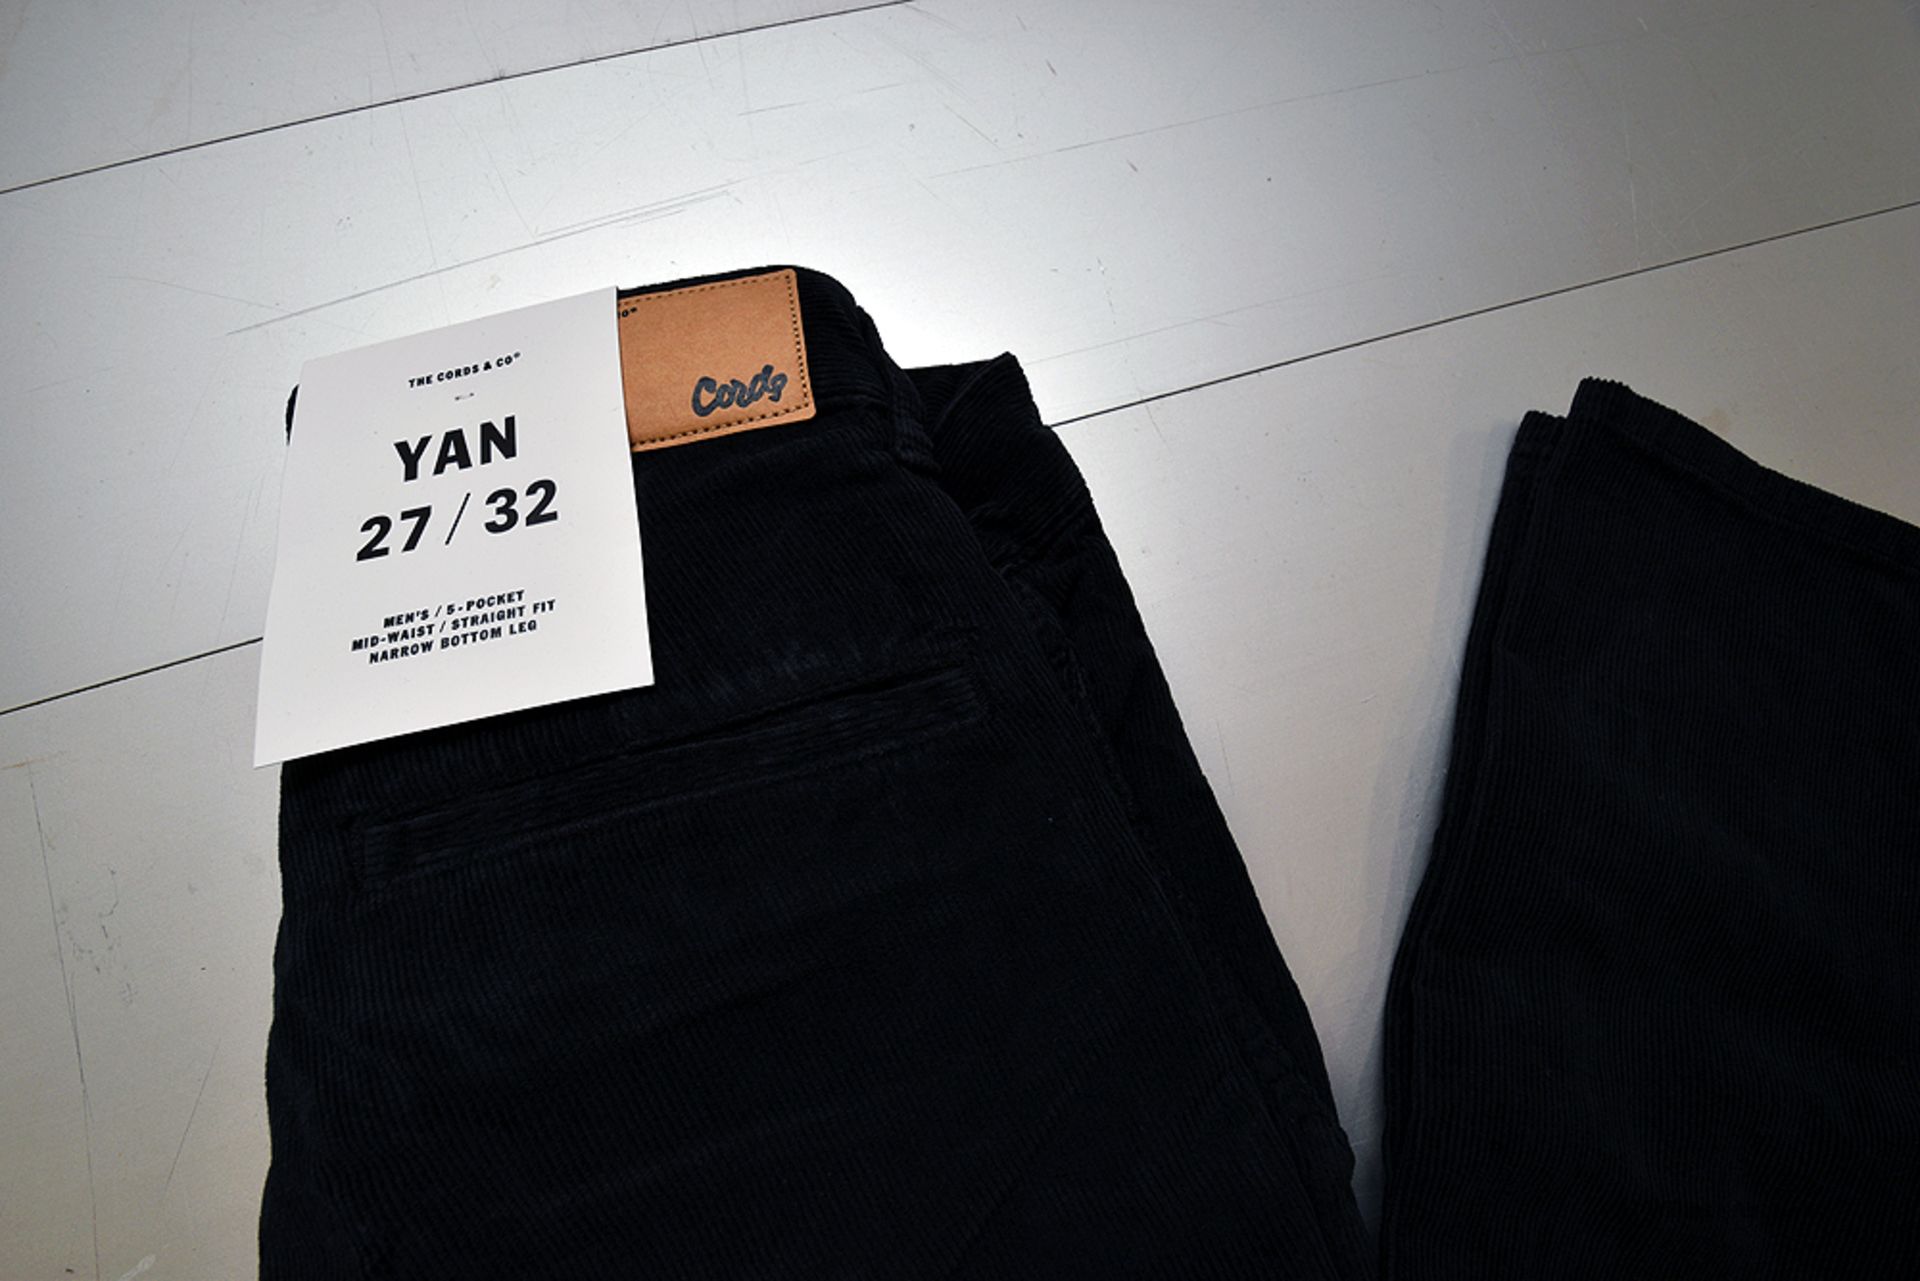 The Cords & Co. "Yan" Mens/Mid-Waist/Straight Fit/Narrow Leg Pants MSRP $160 - Image 6 of 6